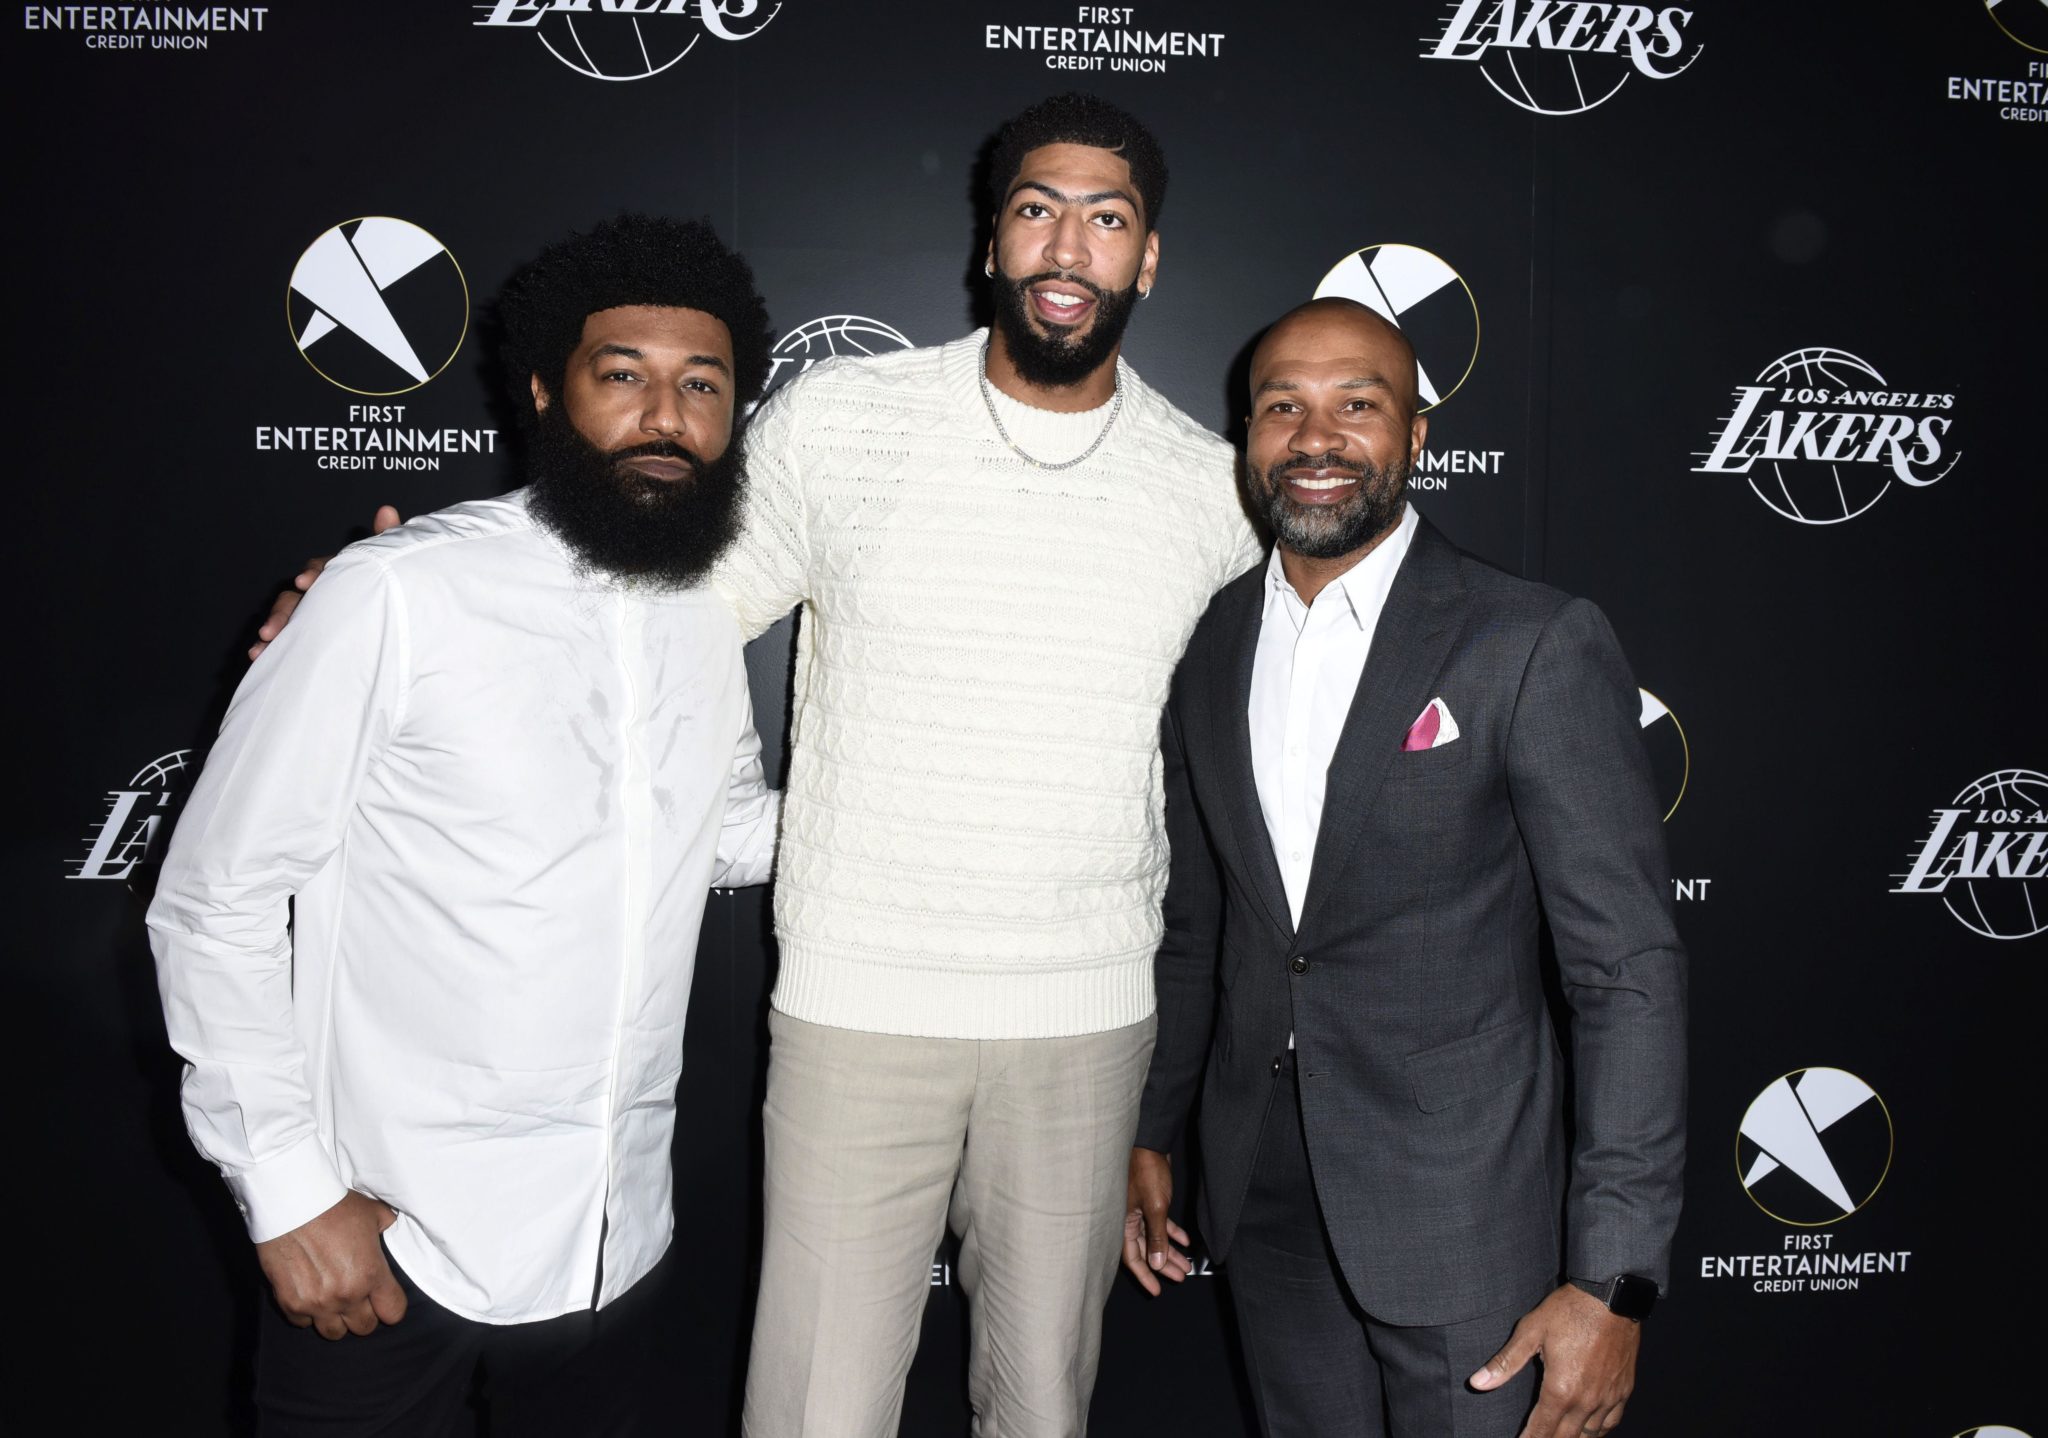 LOS ANGELES, CALIFORNIA - MARCH 4: First Entertainment CMO Amondo Redmond, Lakers star Anthony Davis and Lakers legend  Derek Fisher attend the First Entertainment x Los Angeles Lakers and Anthony Davis Partnership Launch Event at The Theatre at Ace Hotel on March 4, 2020 in Los Angeles, California.  (Photo by Vivien Killilea/Getty Images for First Entertainment)